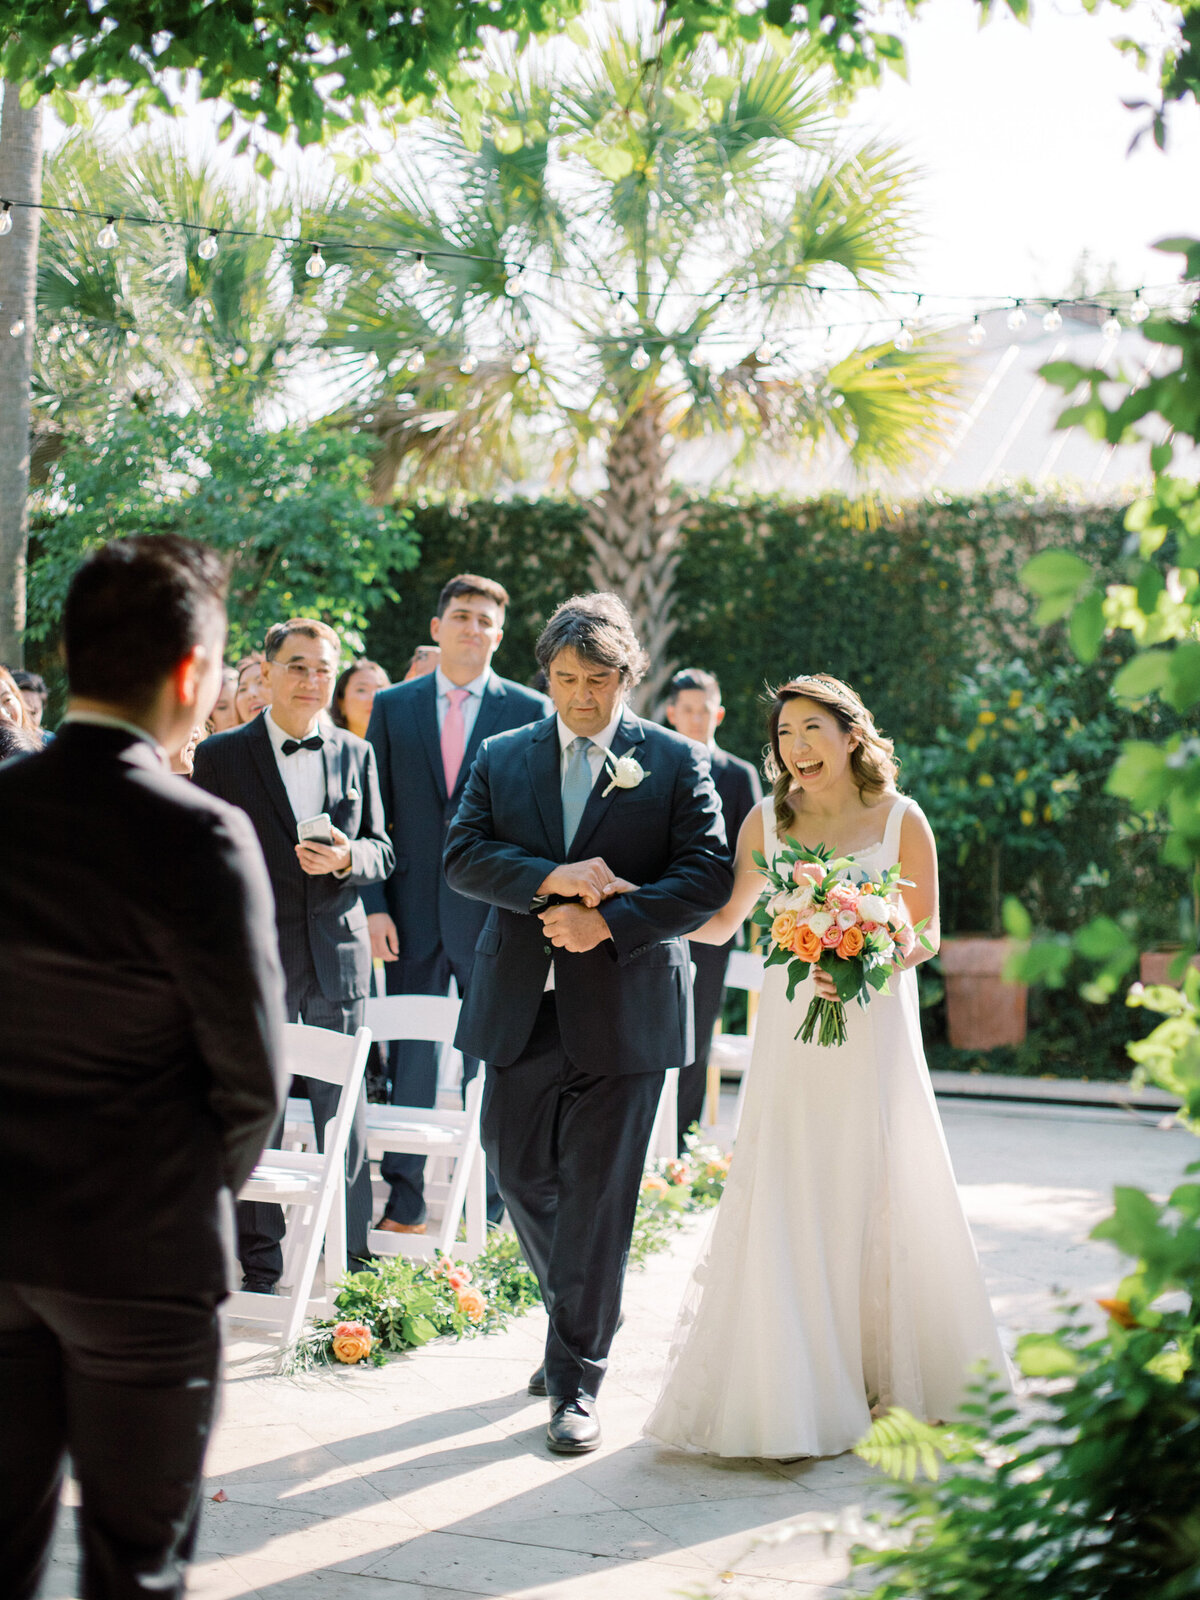 Cannon-Green-Wedding-in-charleston-photo-by-philip-casey-photography-090